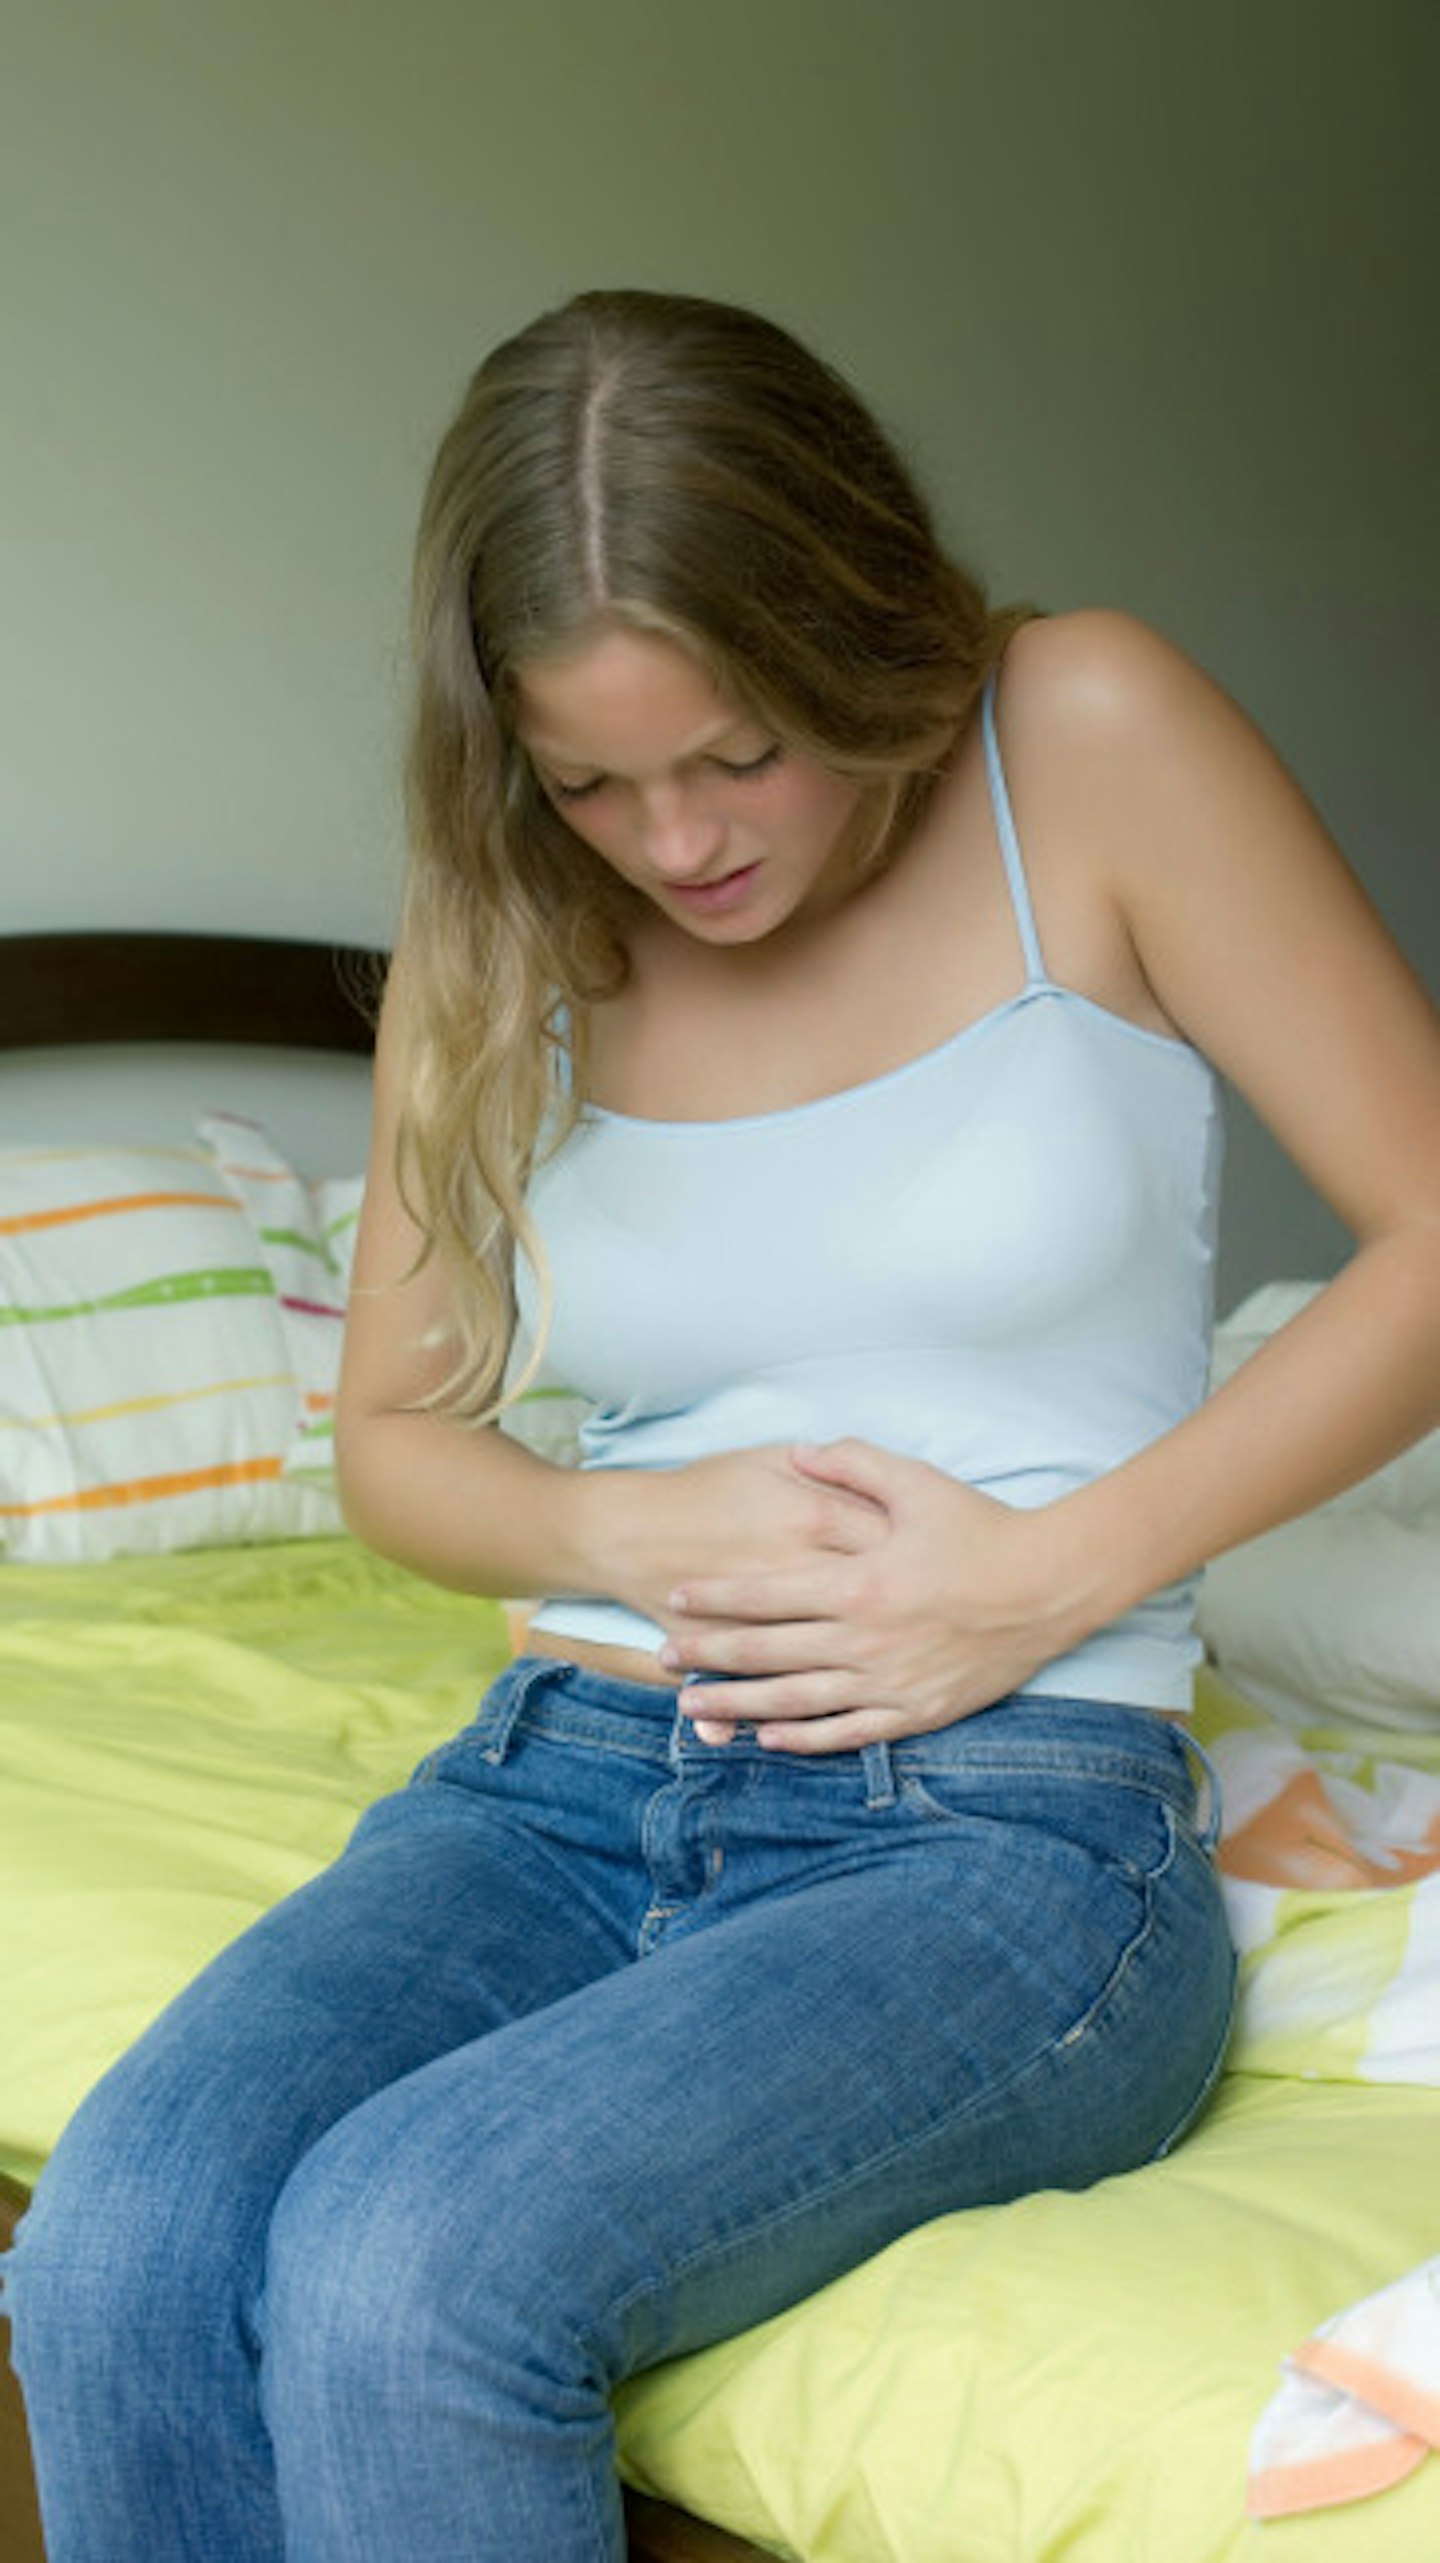 Ectopic pregnancy: Spotting the signs - and getting help